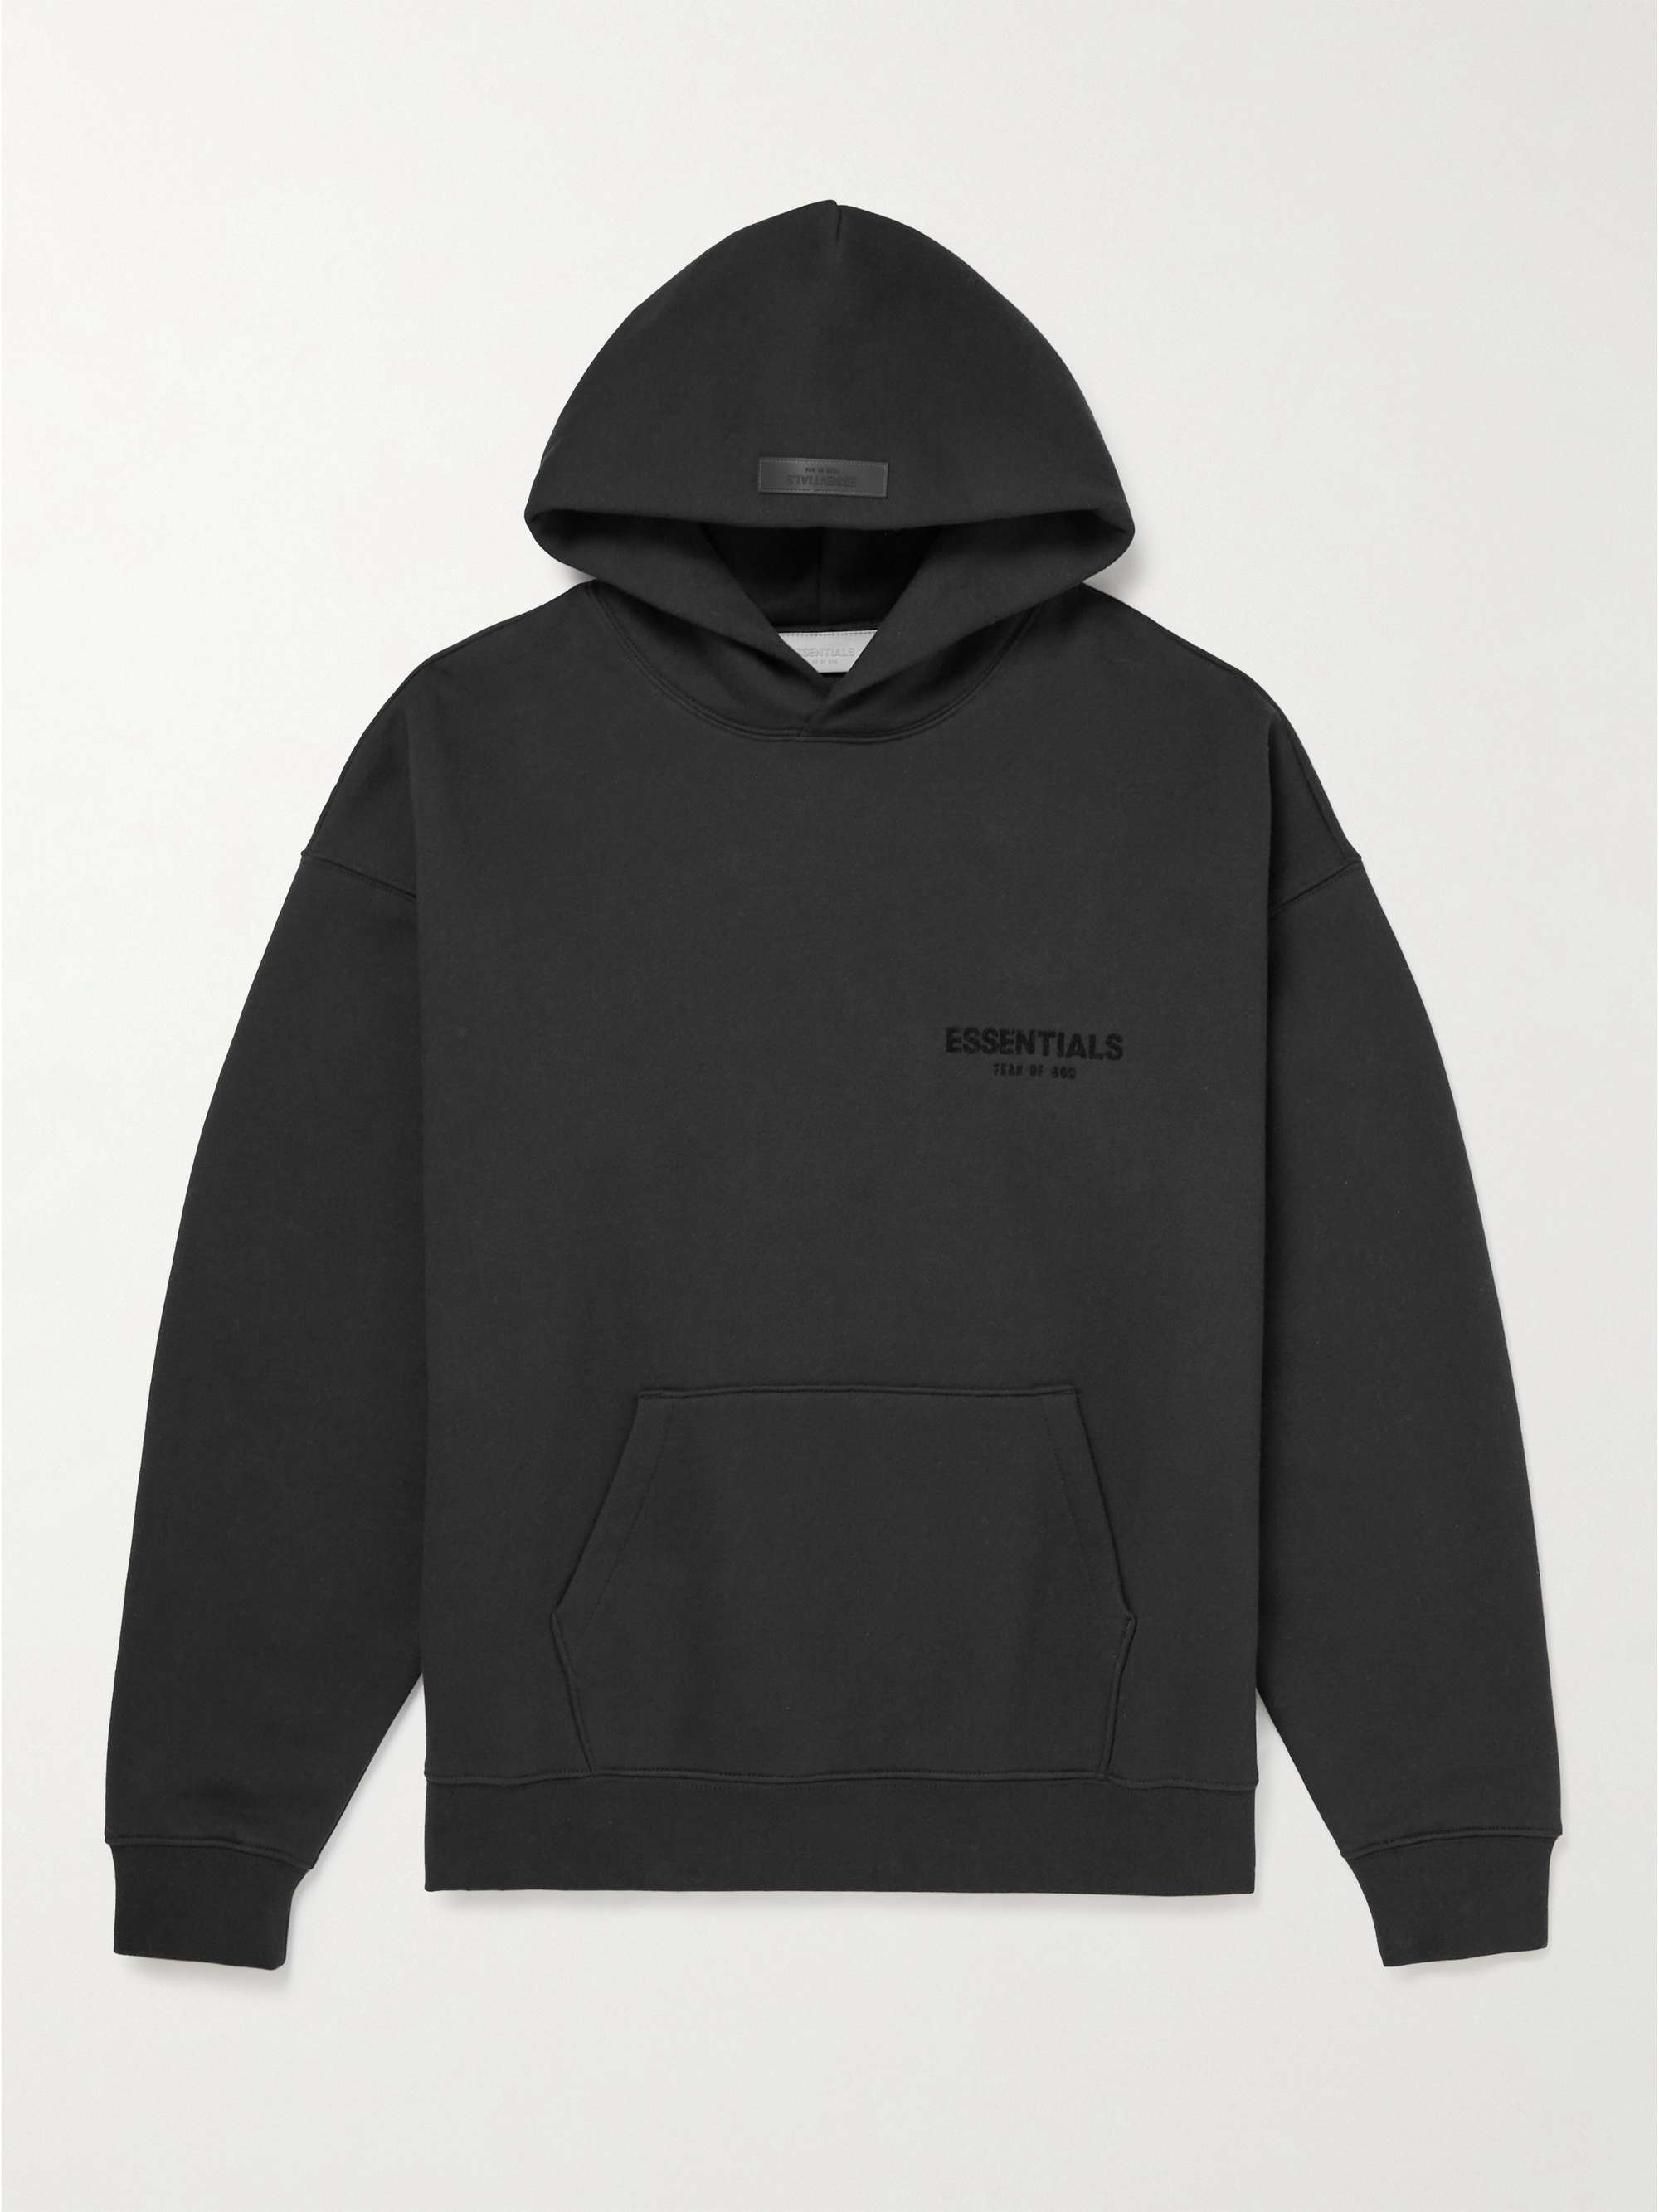 Fear Of God Essential Hoodie in Natural for Men